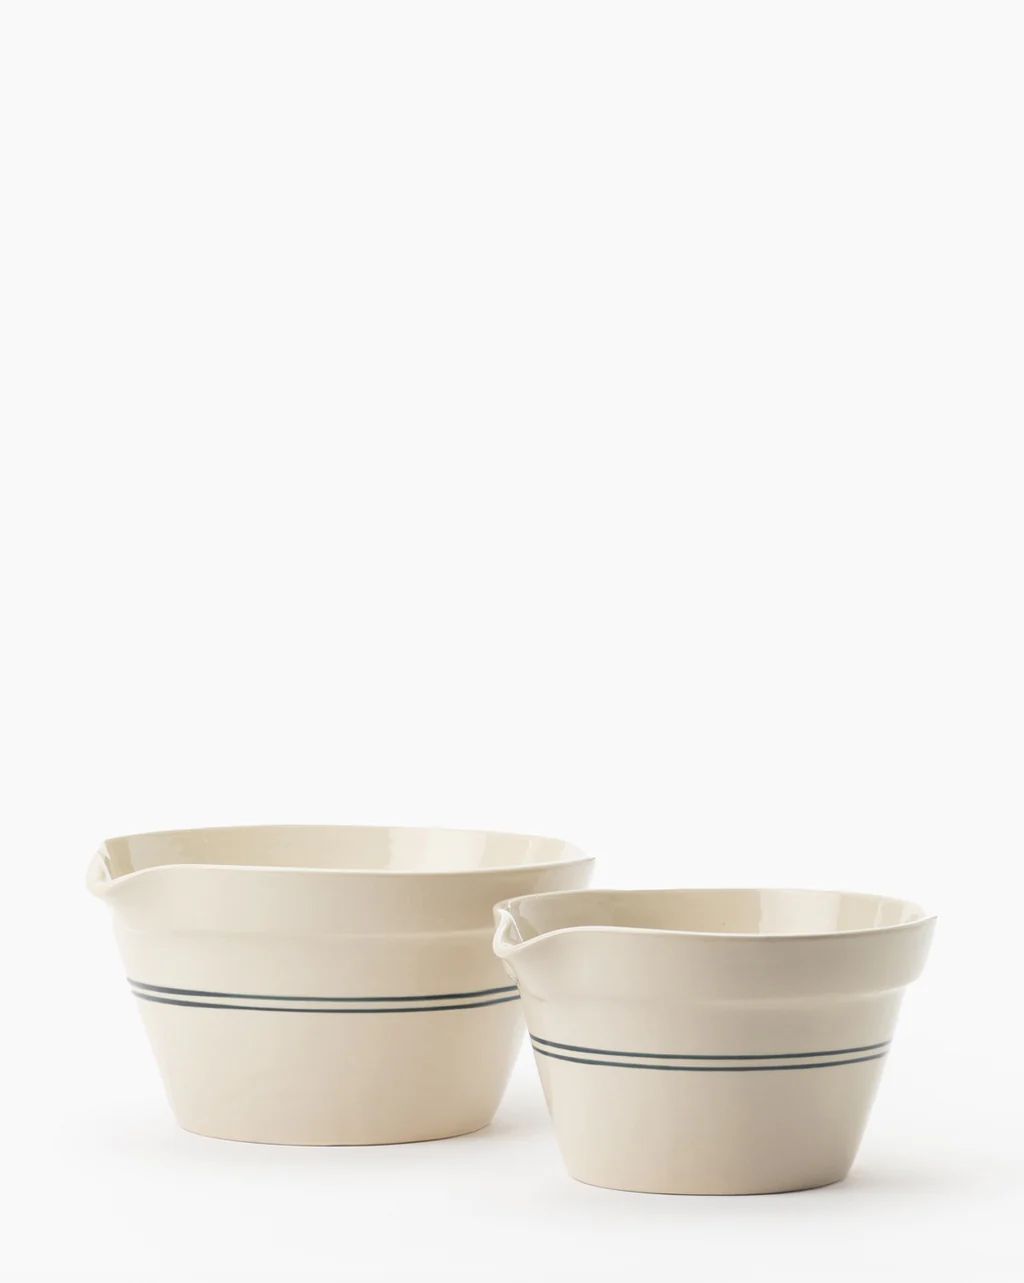 Everett Mixing Bowl | McGee & Co.